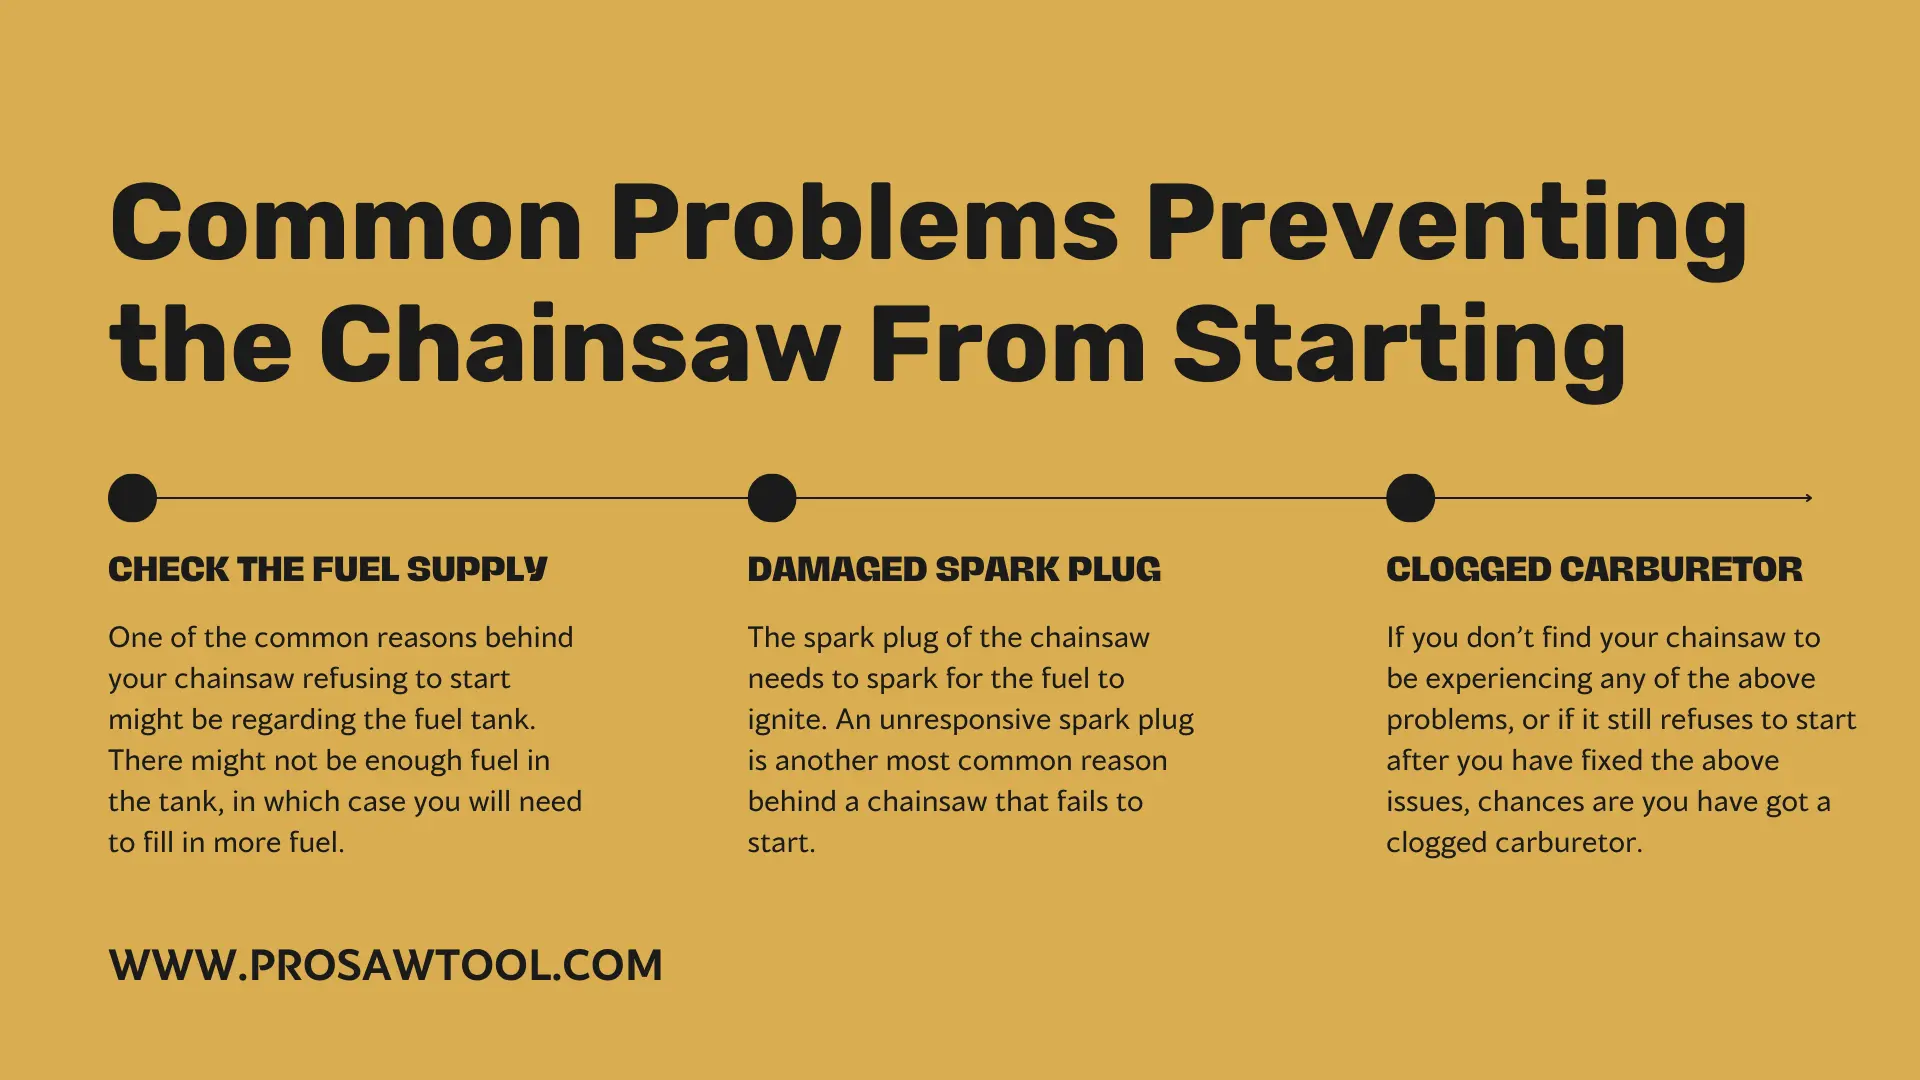 Common Problems Preventing the Chainsaw From Starting